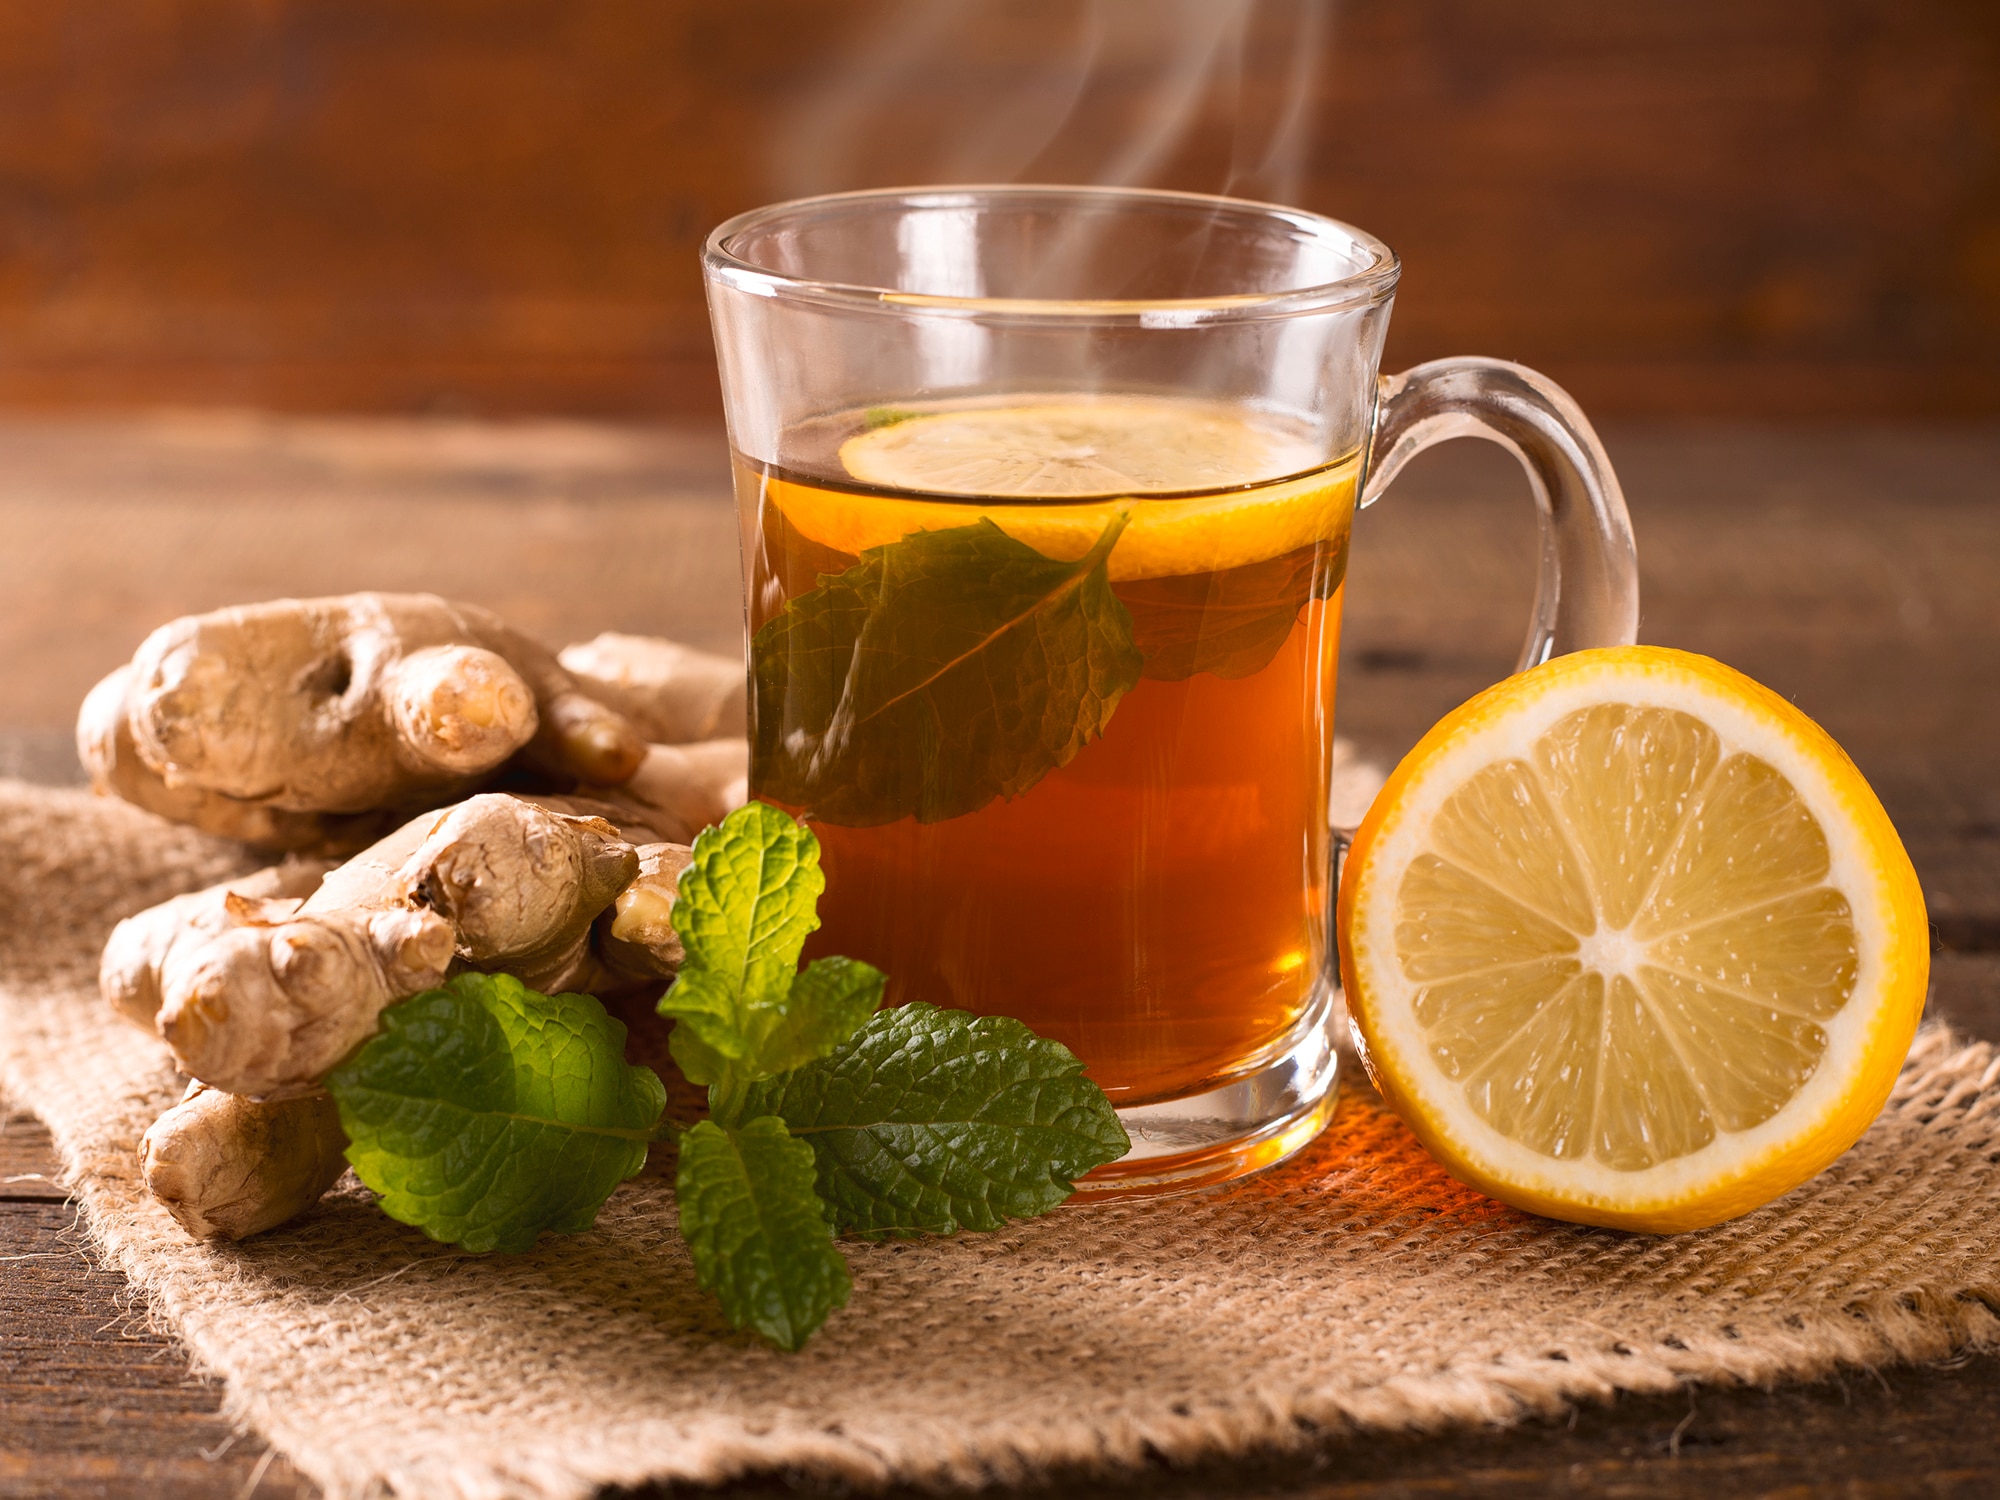 What are the benefits of ginger tea for relieving symptoms of cold and flu?